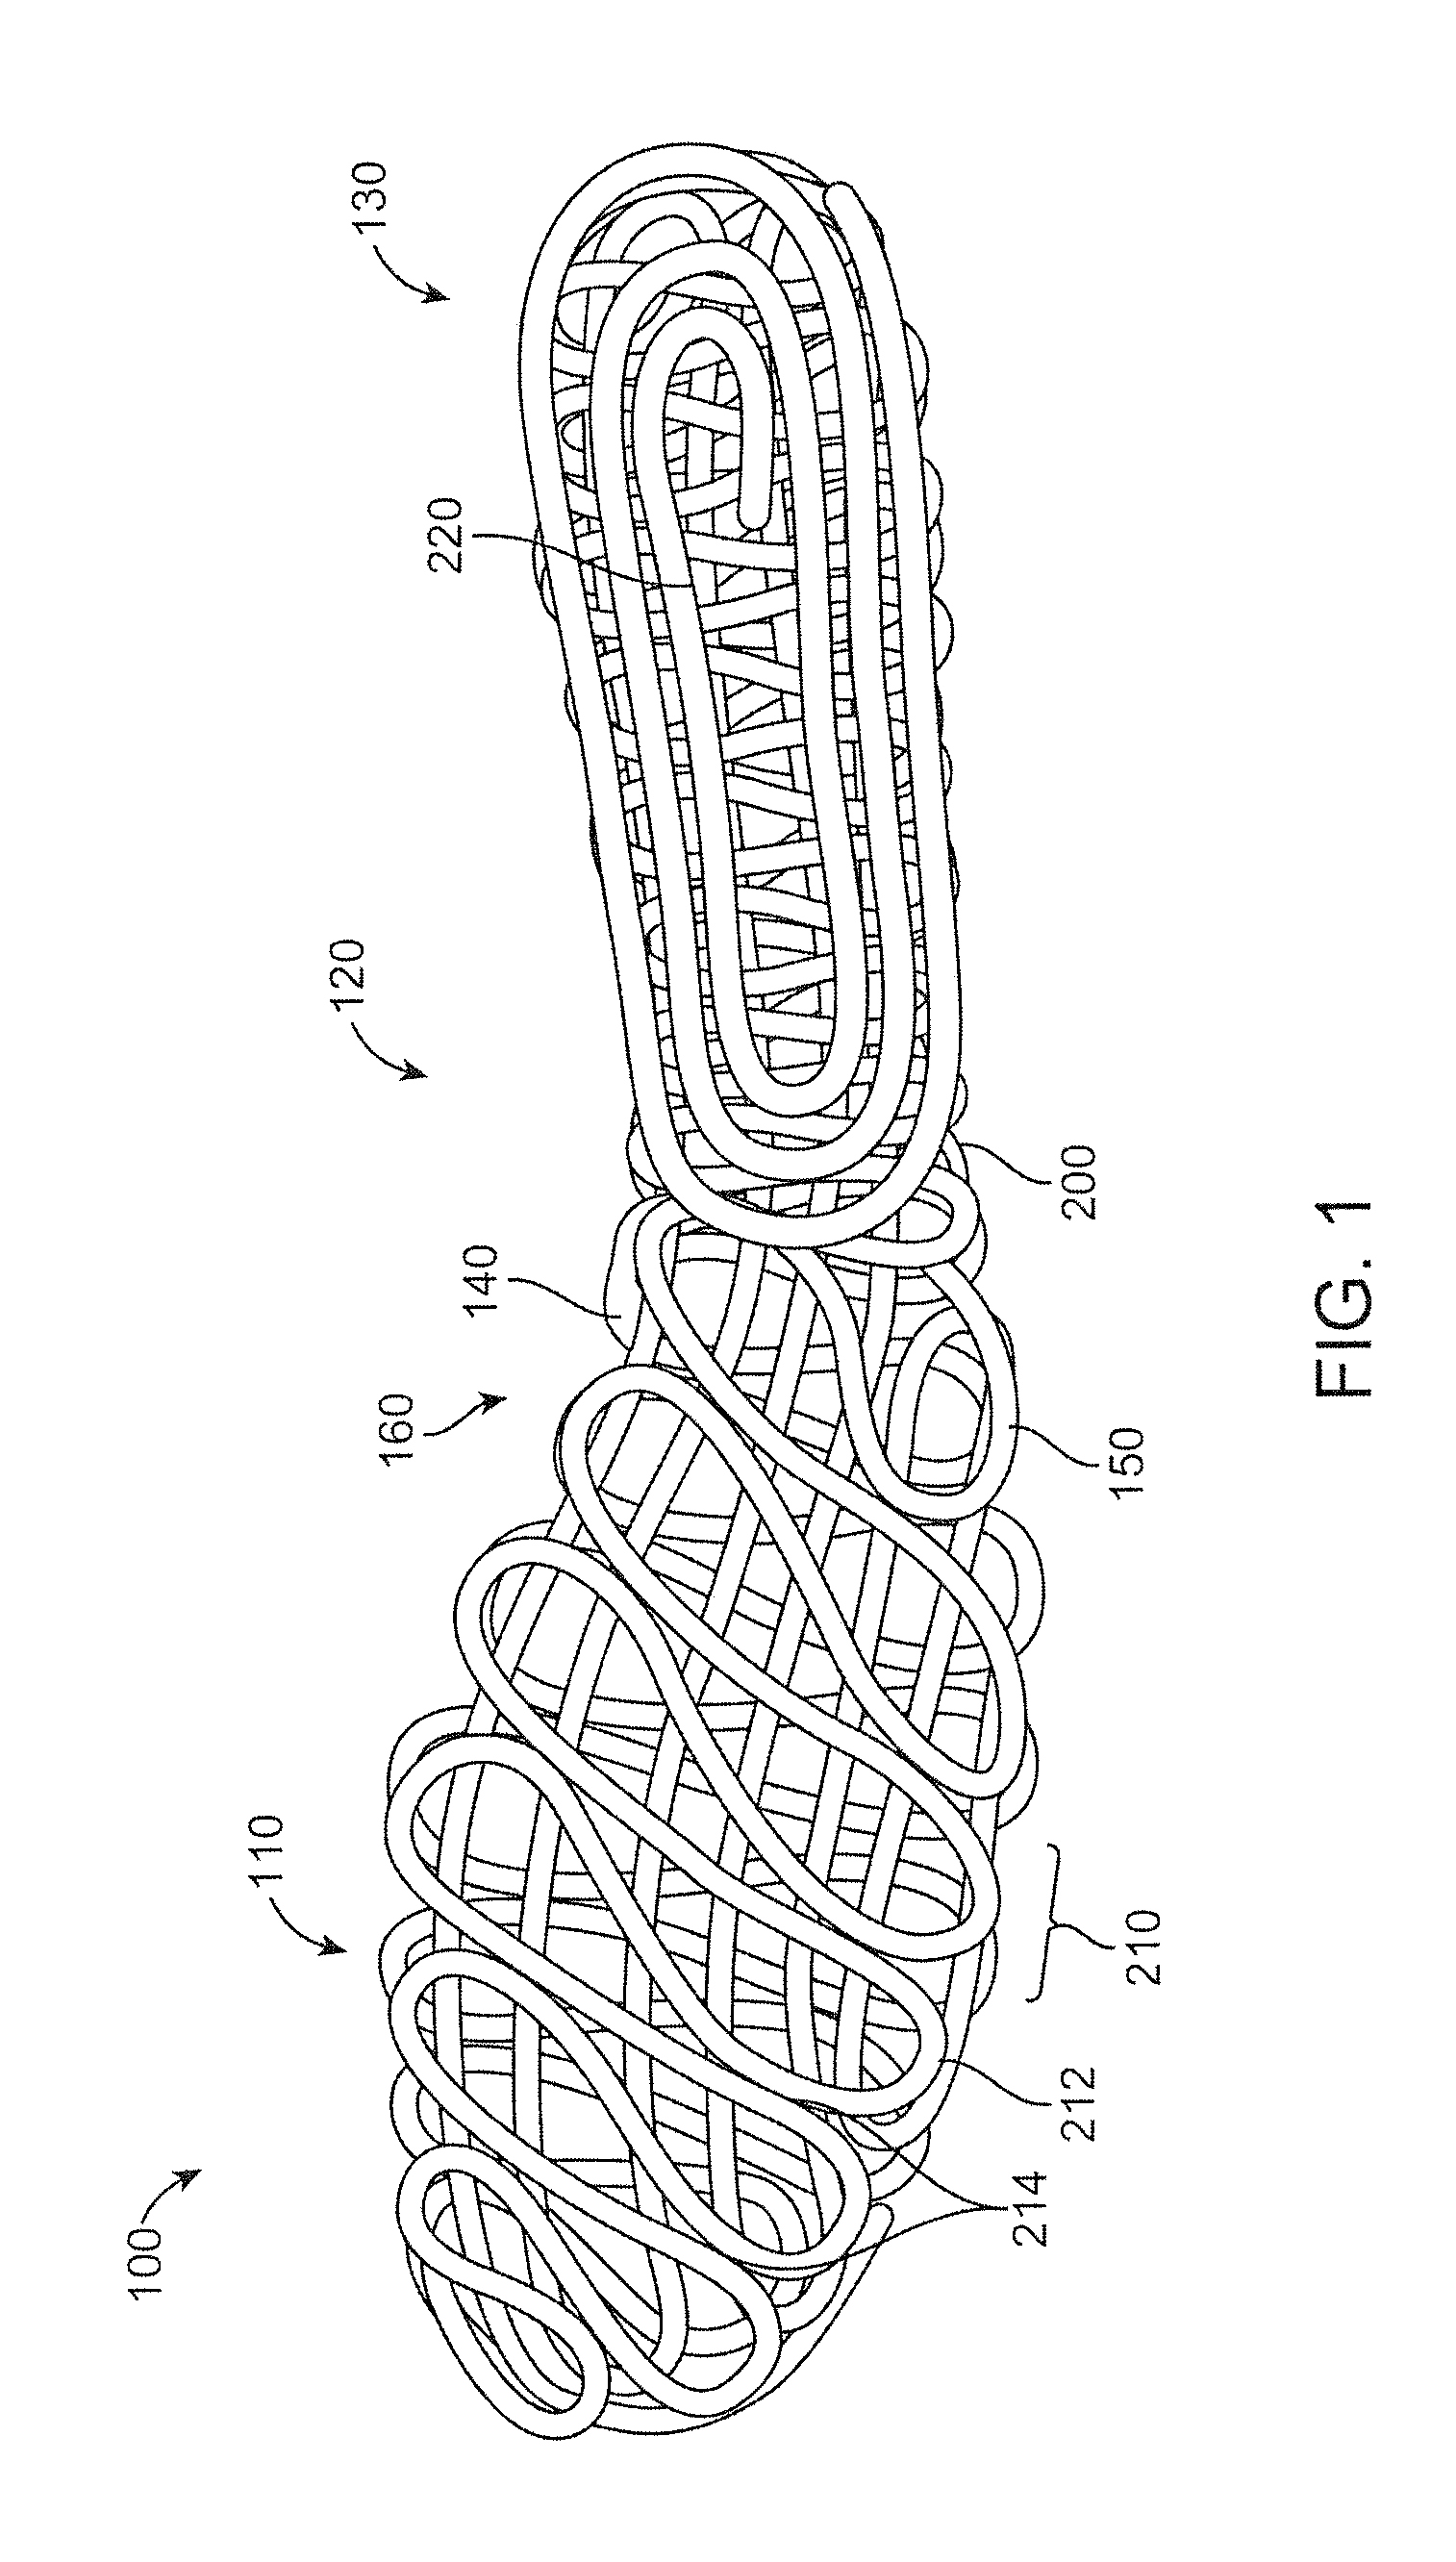 Article Of Footwear With Extruded Components